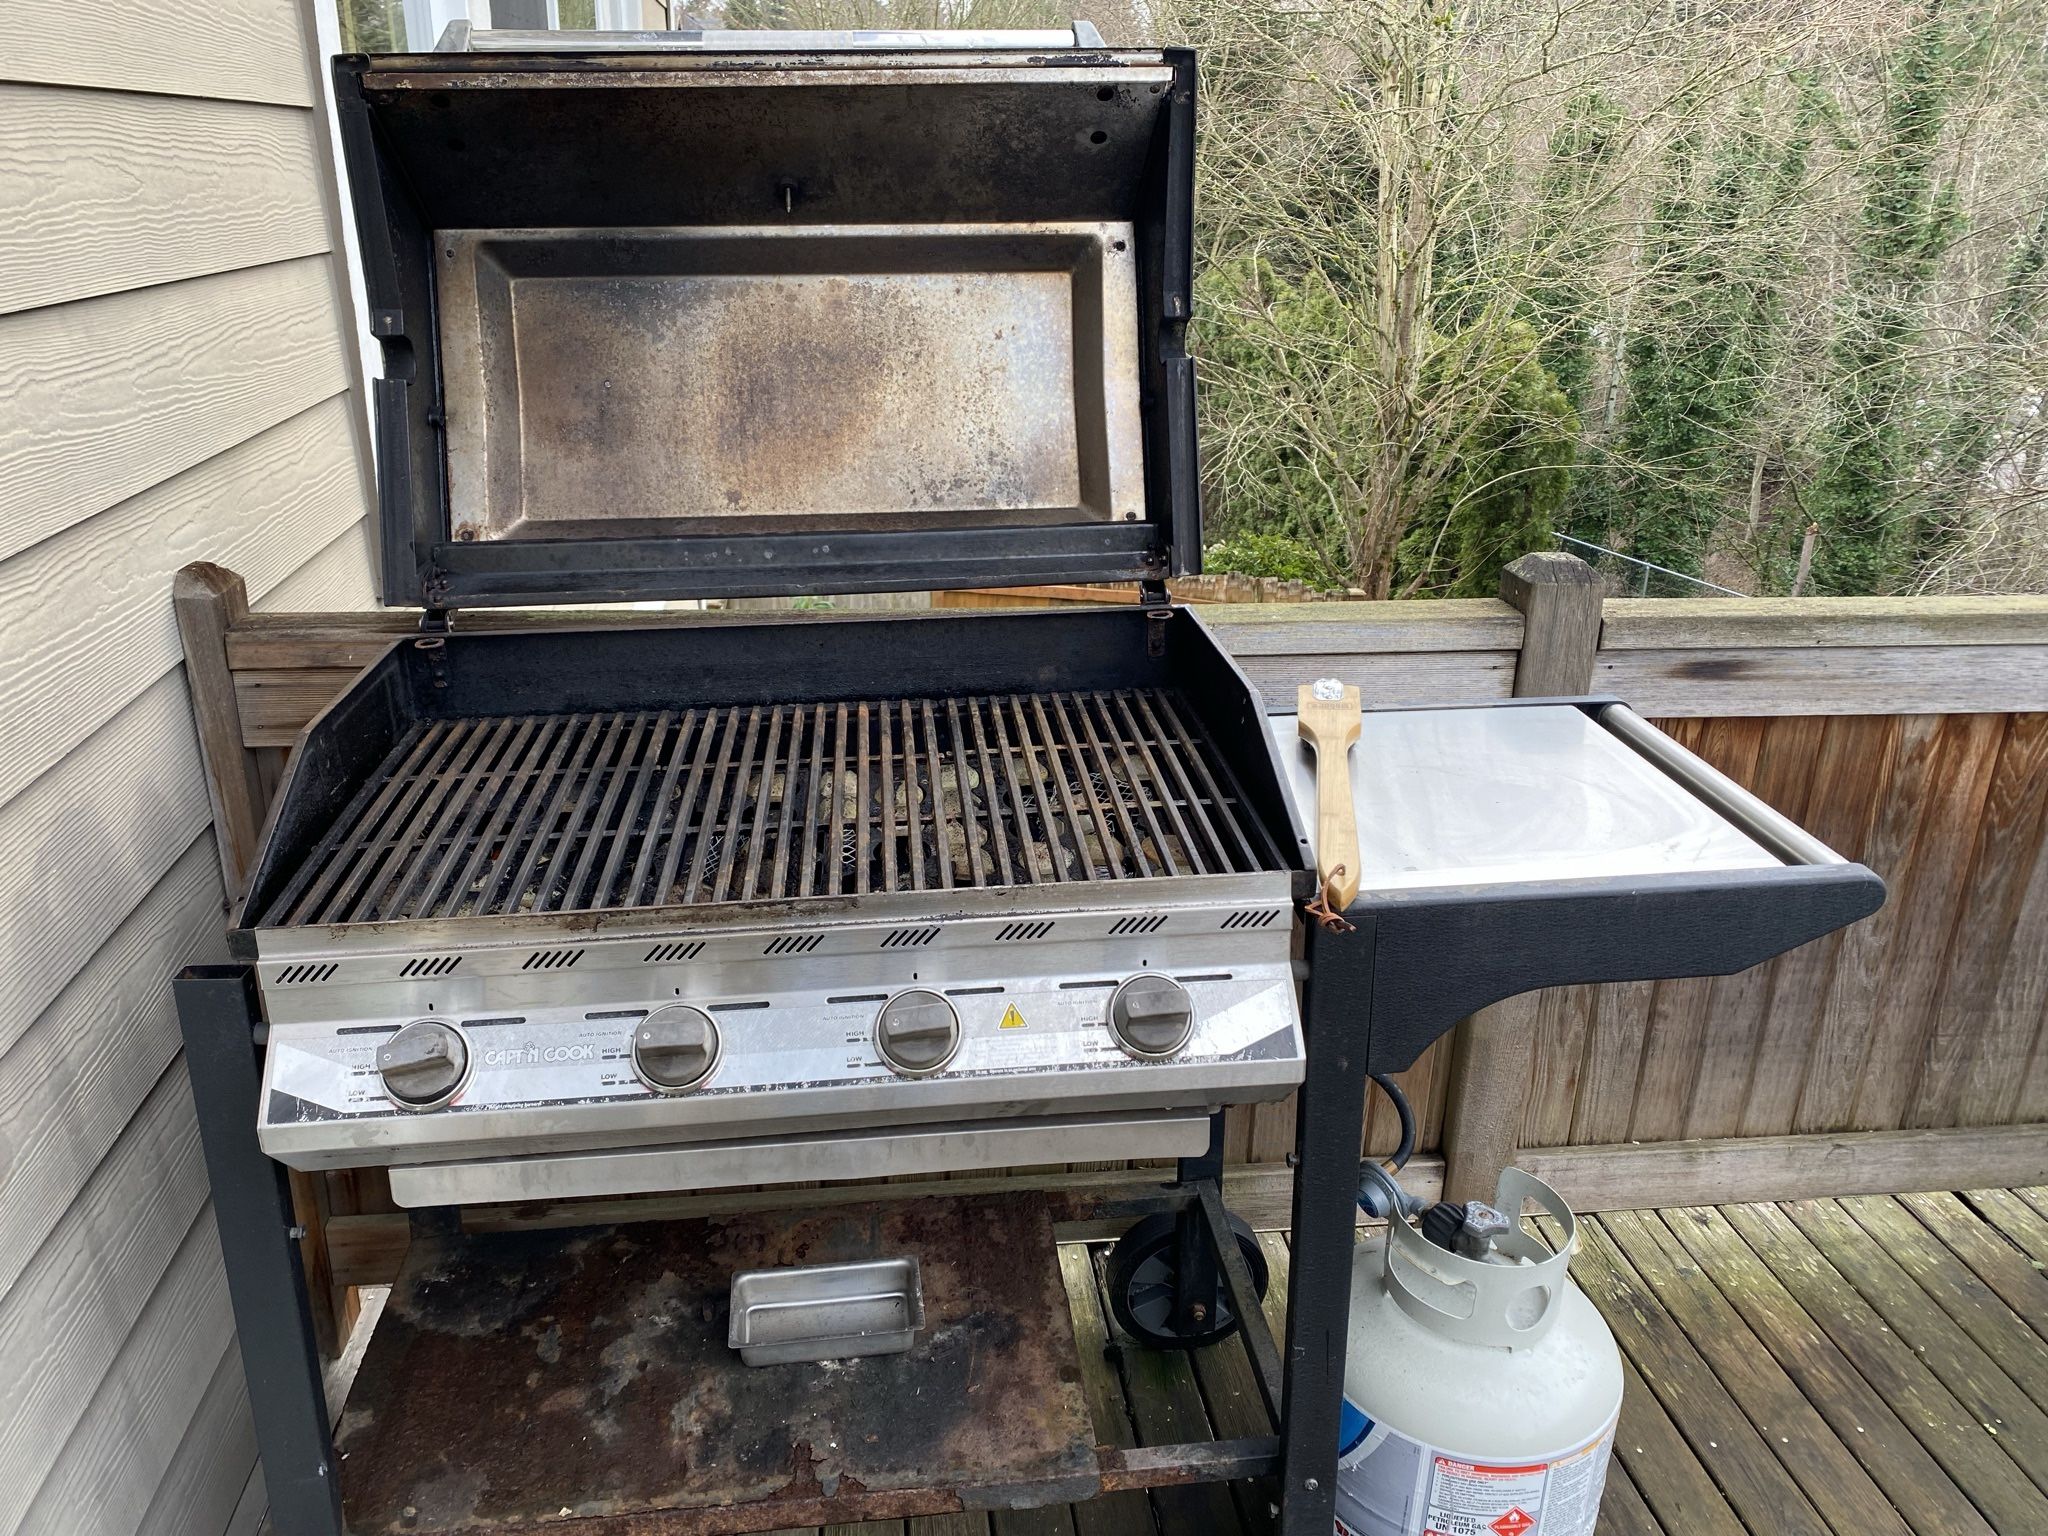 Gas Grill : 4 Burner: Works Very Well: Grill Grates Replaced Last Year